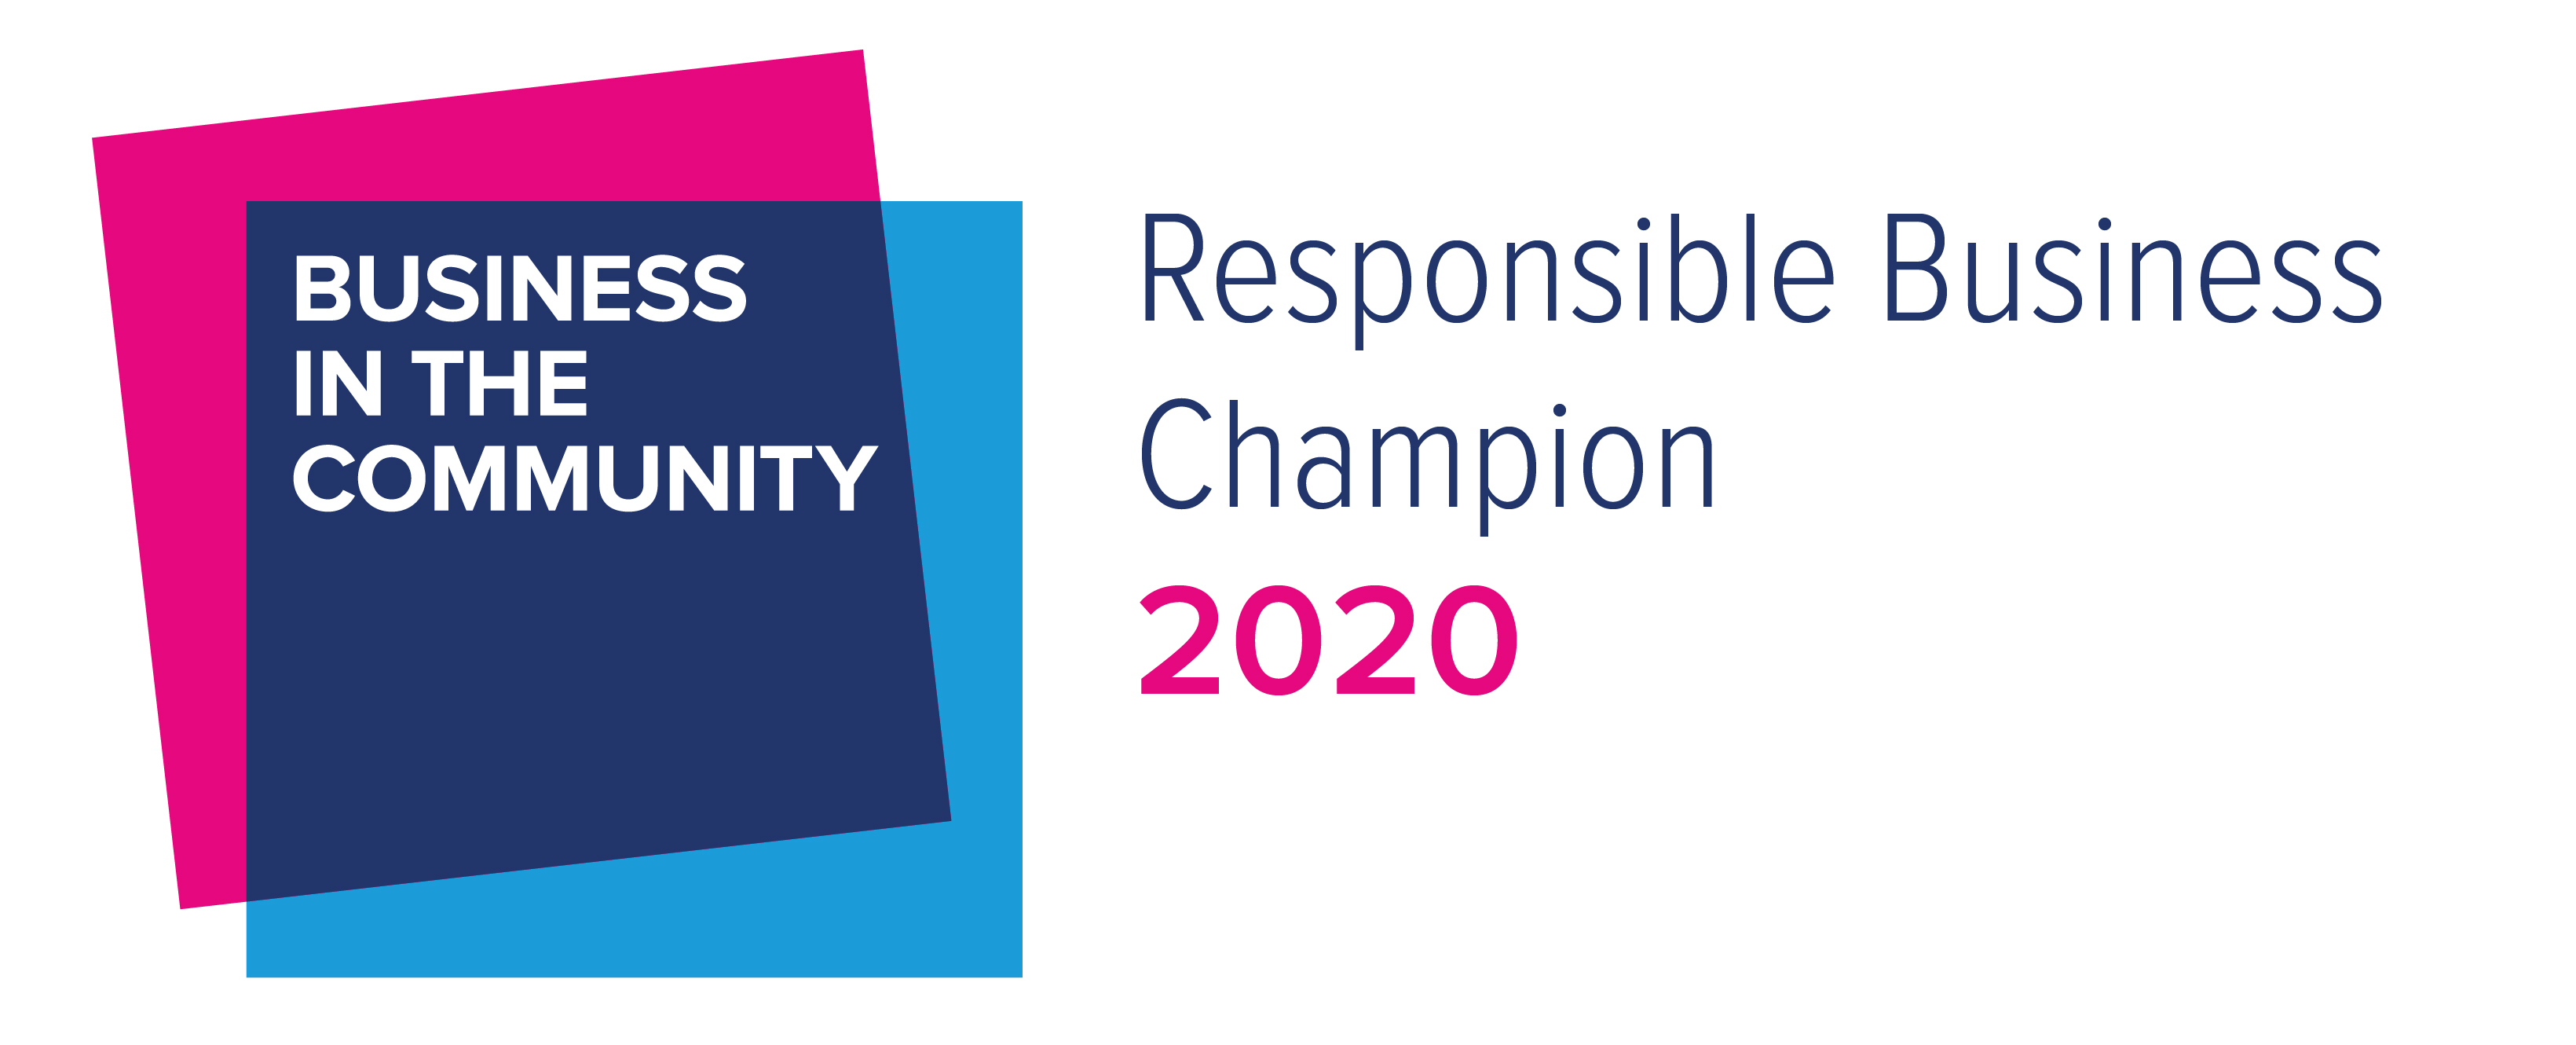 Responsible Business Champion 2020 image